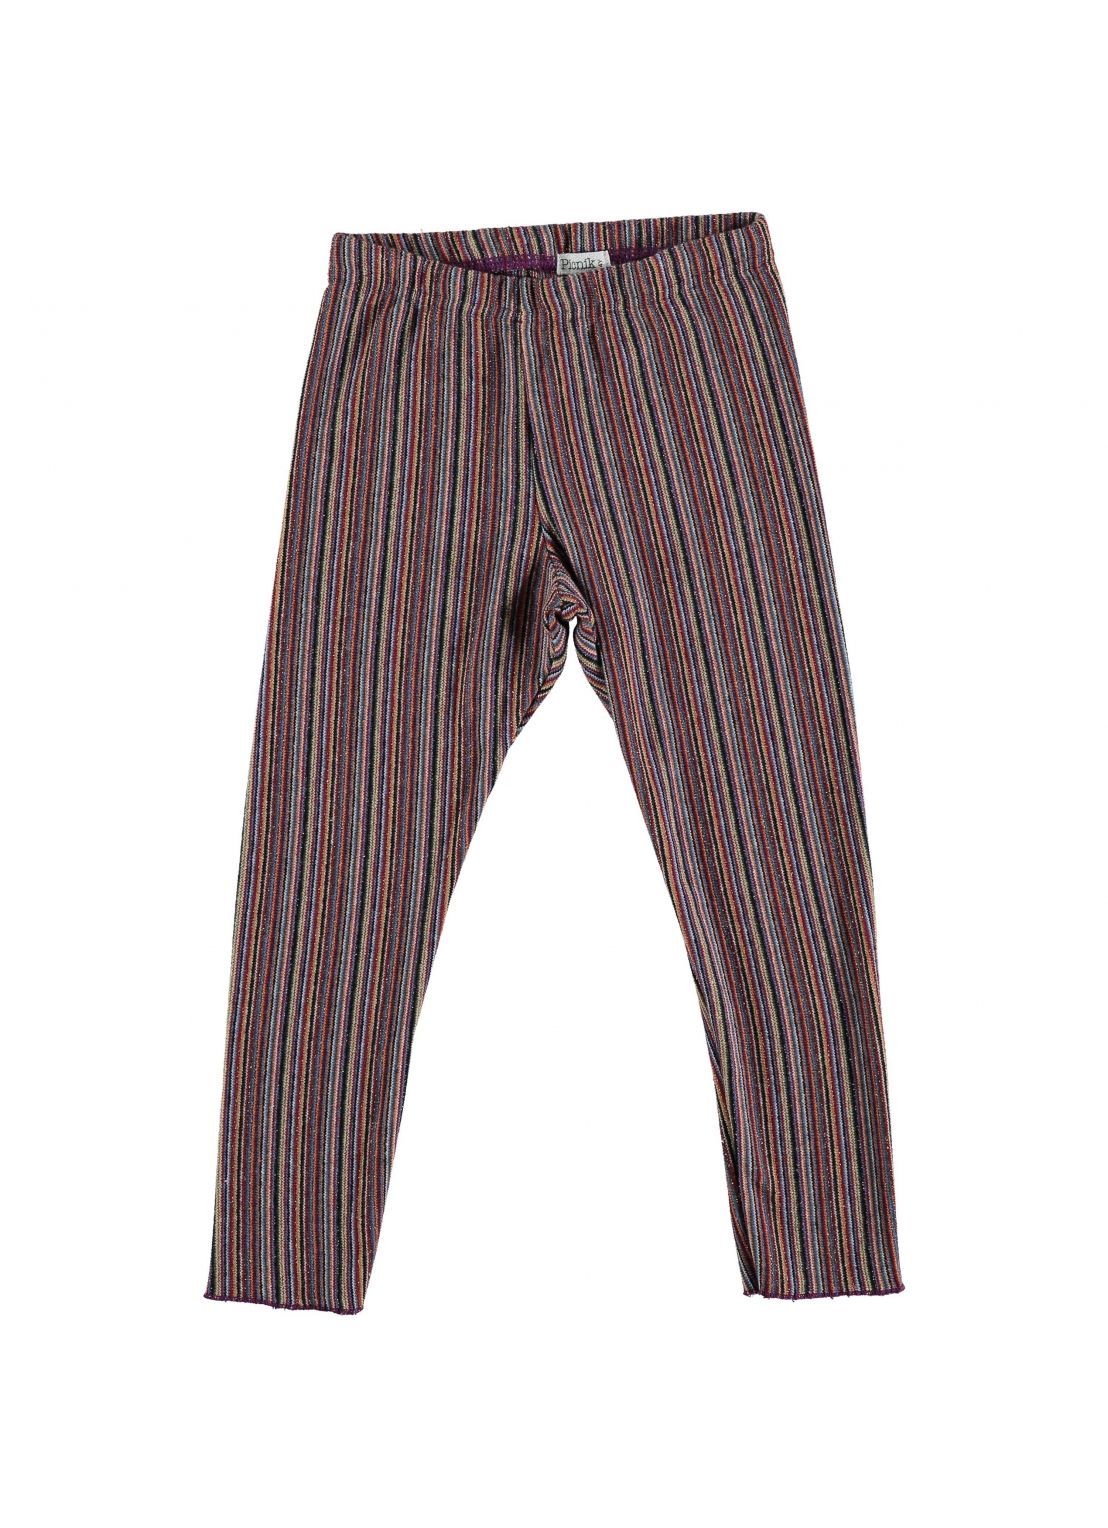 Kid TROUSERS Unisex -50 % CO 36 PAC 6 % ME, 4 % OF,4% EA- Knitted